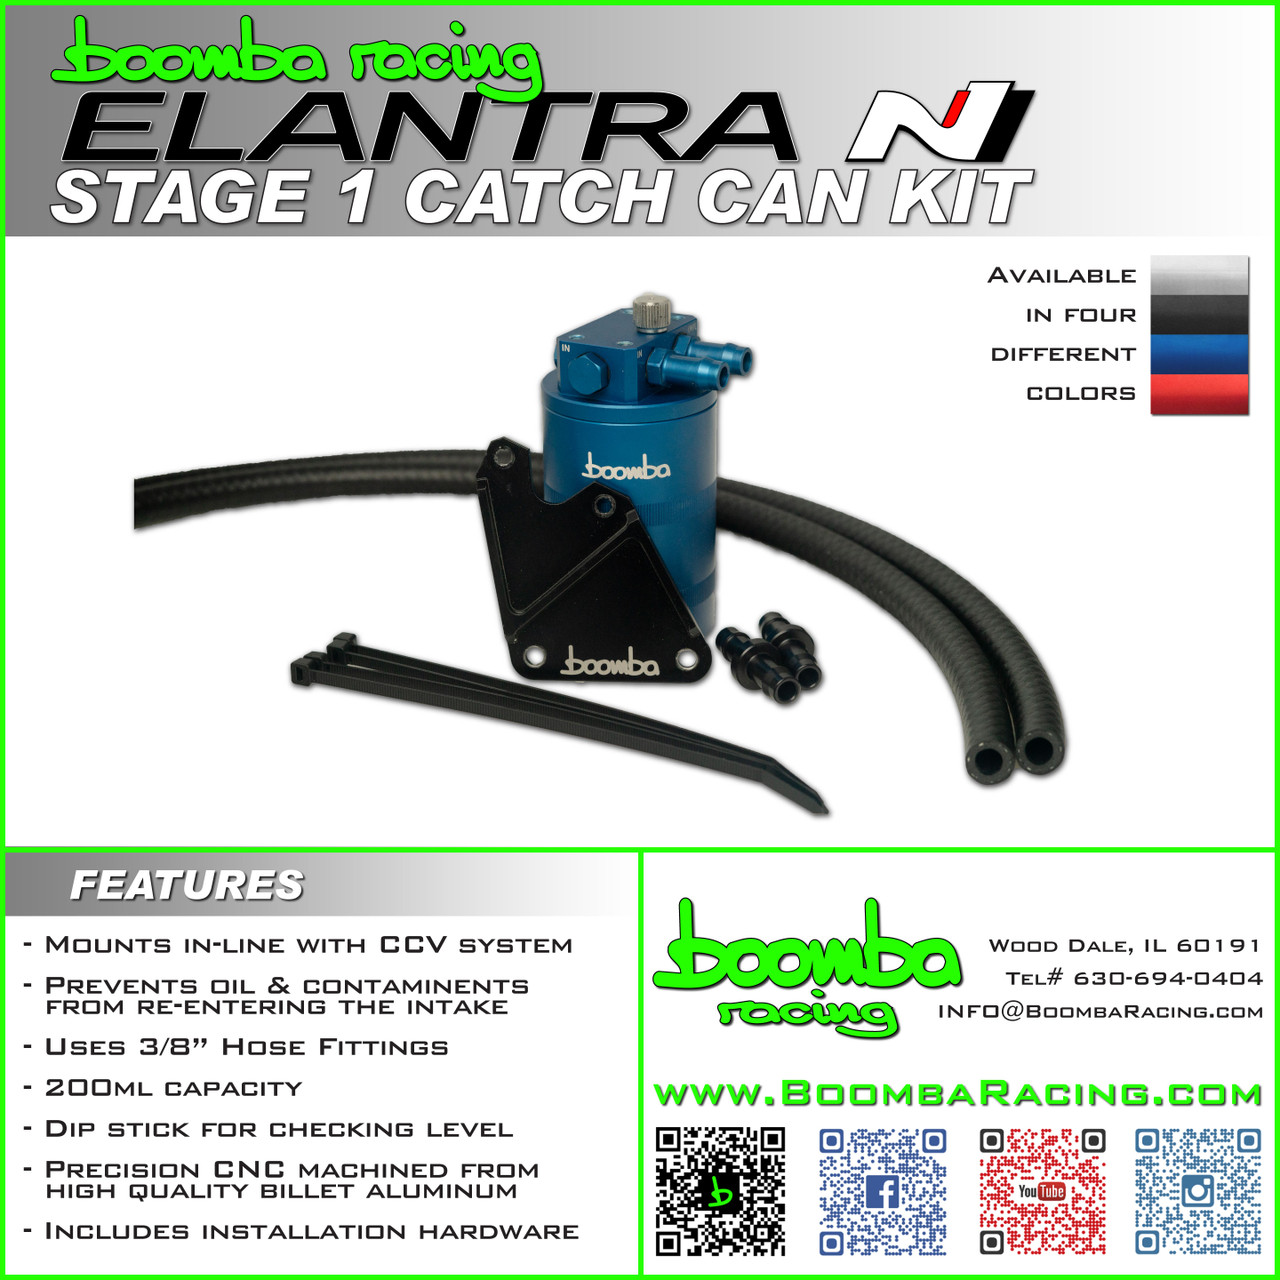 ELANTRA N STAGE 1 CATCH CAN KIT